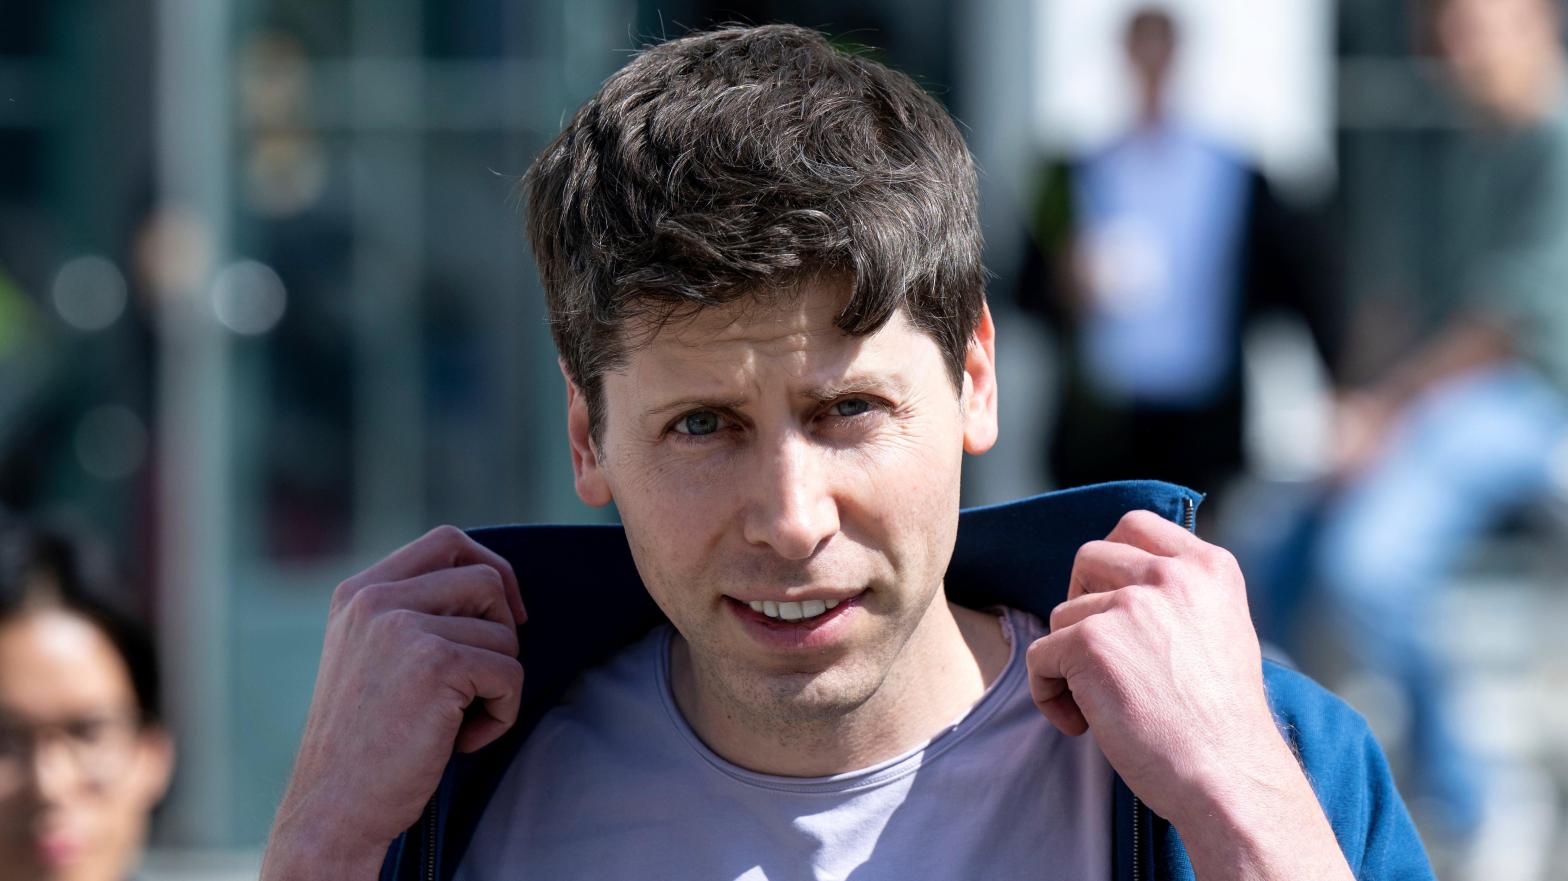 OpenAI CEO Sam Altman just completed a tour in Africa and Europe promoting his version of AI and AI regulation. (Photo: Sven Hoppe/picture-alliance/dpa, Getty Images)